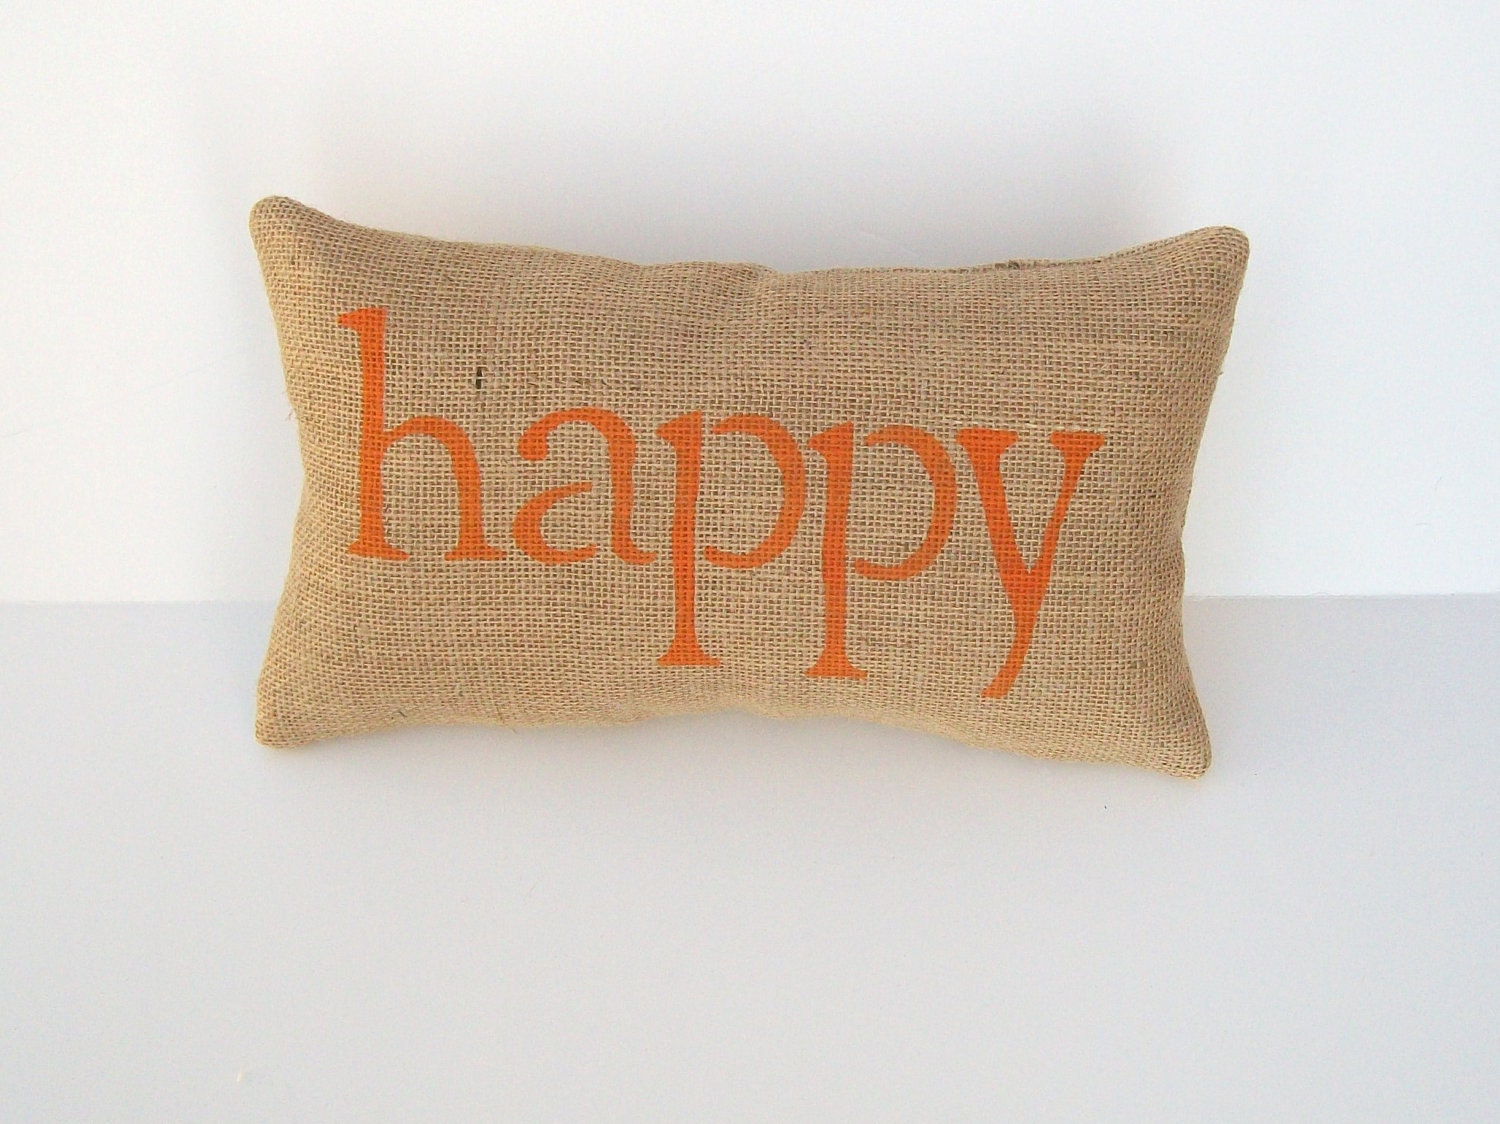 burlap pillow, decorative happy pillow, fall decor, orange pillow, home decor, nursery decor, gift under 35 by whimsysweetwhimsy - whimsysweetwhimsy